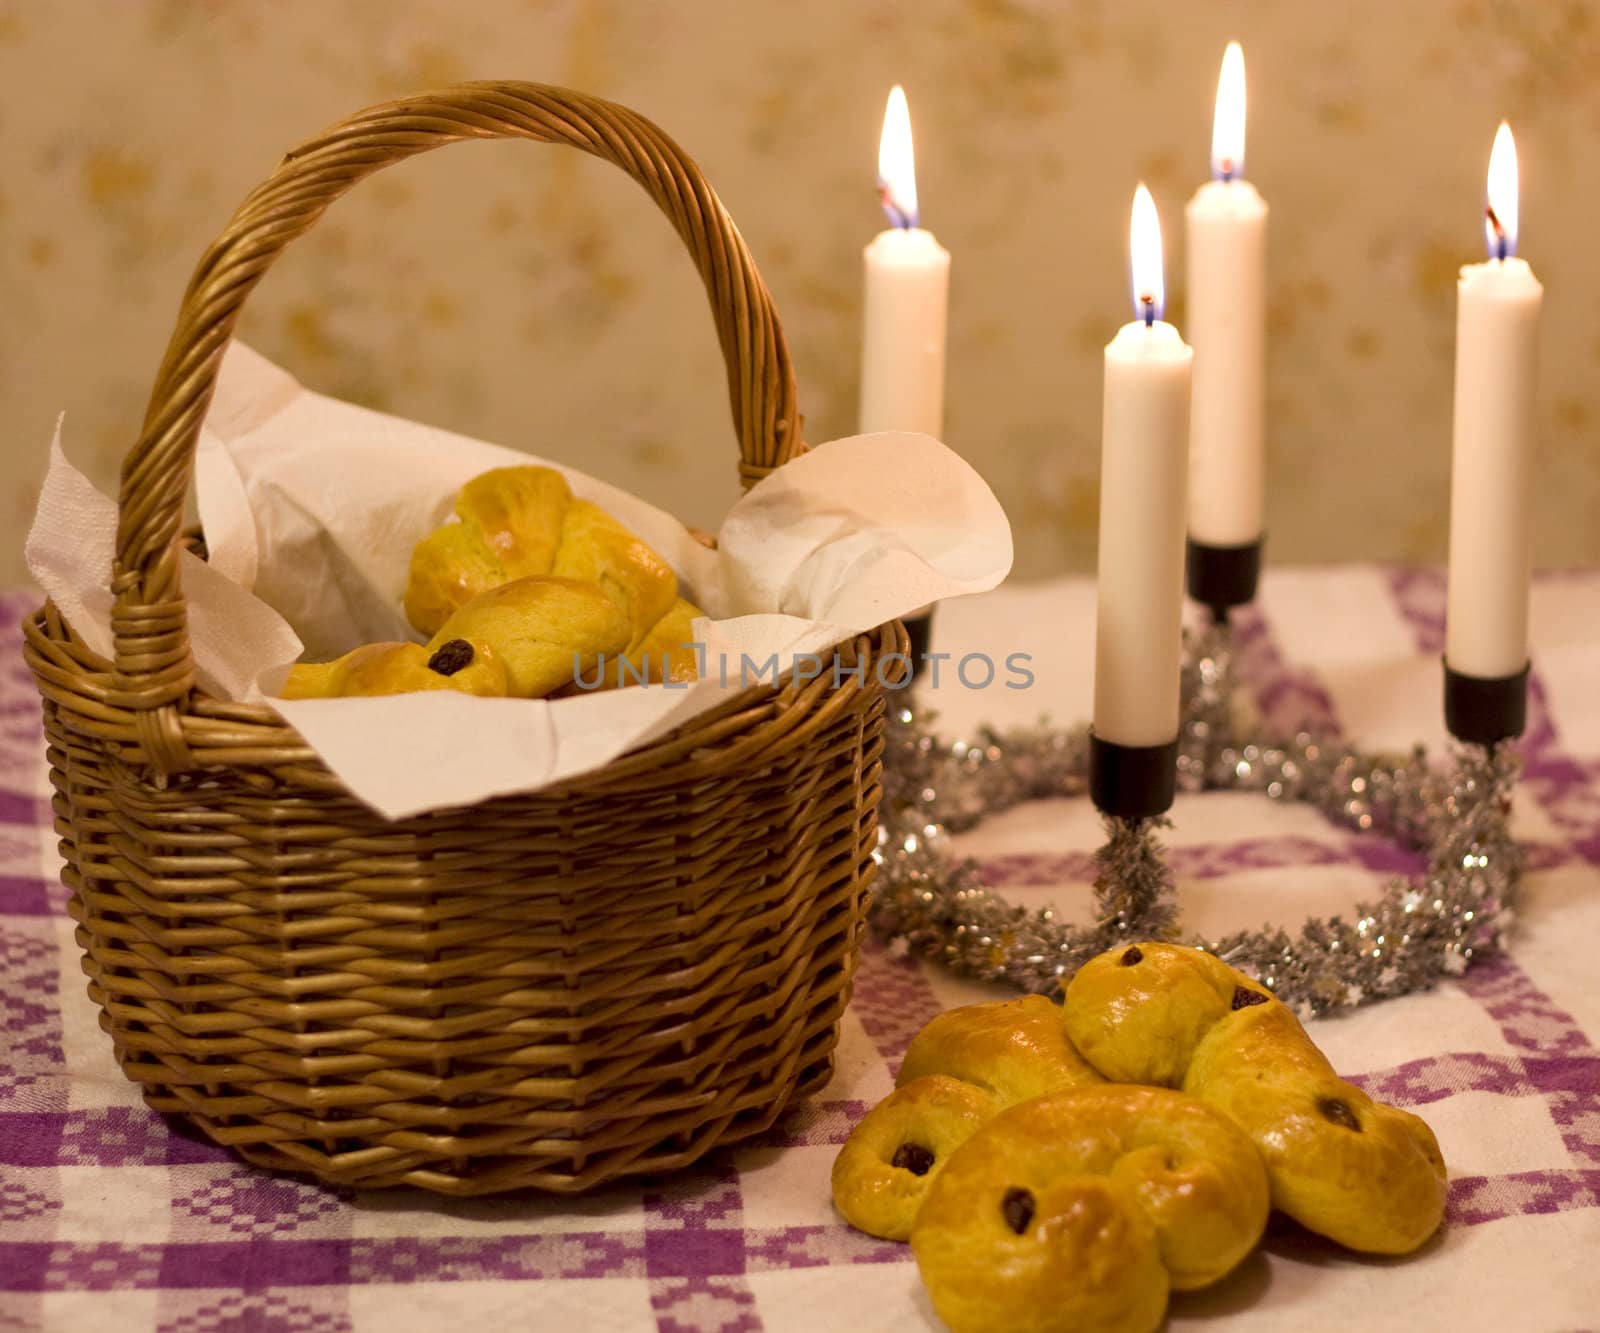 Sweet saffron buns (lussekatter) in a basket, ready for st. Lucia's day.